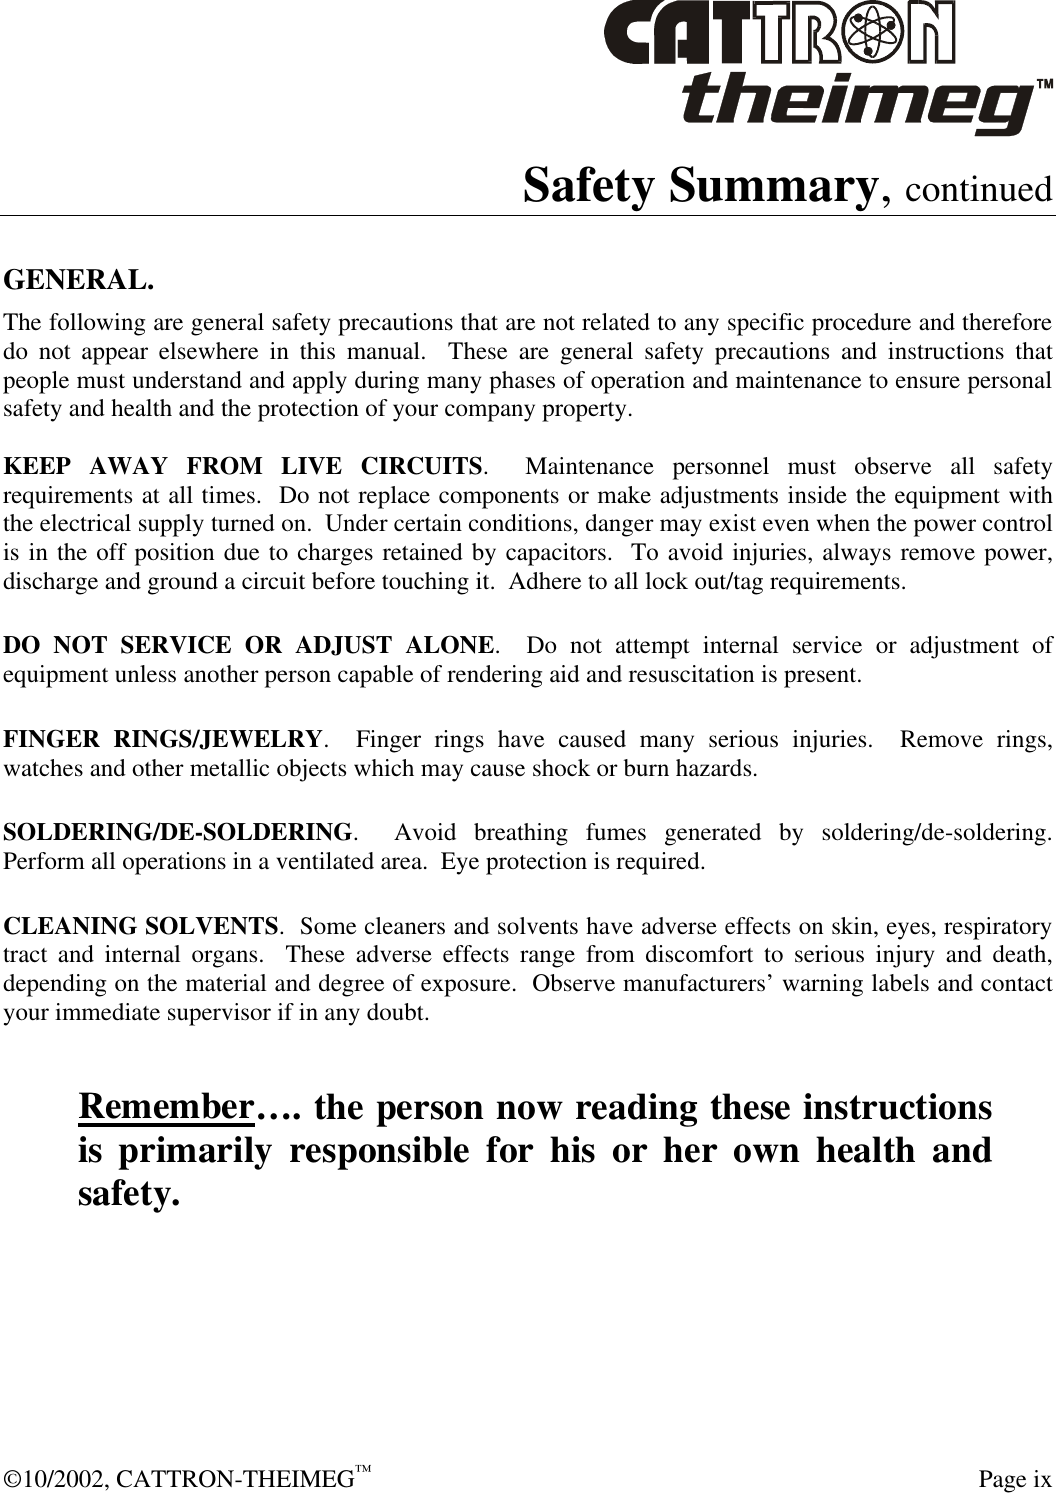  ©10/2002, CATTRON-THEIMEG™  Page ix Safety Summary, continued  GENERAL. The following are general safety precautions that are not related to any specific procedure and therefore do not appear elsewhere in this manual.  These are general safety precautions and instructions that people must understand and apply during many phases of operation and maintenance to ensure personal safety and health and the protection of your company property.  KEEP AWAY FROM LIVE CIRCUITS.  Maintenance personnel must observe all safety requirements at all times.  Do not replace components or make adjustments inside the equipment with the electrical supply turned on.  Under certain conditions, danger may exist even when the power control is in the off position due to charges retained by capacitors.  To avoid injuries, always remove power, discharge and ground a circuit before touching it.  Adhere to all lock out/tag requirements.   DO NOT SERVICE OR ADJUST ALONE.  Do not attempt internal service or adjustment of equipment unless another person capable of rendering aid and resuscitation is present.   FINGER RINGS/JEWELRY.  Finger rings have caused many serious injuries.  Remove rings, watches and other metallic objects which may cause shock or burn hazards.     SOLDERING/DE-SOLDERING.  Avoid breathing fumes generated by soldering/de-soldering. Perform all operations in a ventilated area.  Eye protection is required.   CLEANING SOLVENTS.  Some cleaners and solvents have adverse effects on skin, eyes, respiratory tract and internal organs.  These adverse effects range from discomfort to serious injury and death, depending on the material and degree of exposure.  Observe manufacturers’ warning labels and contact your immediate supervisor if in any doubt.   Remember…. the person now reading these instructions is primarily responsible for his or her own health and safety. 